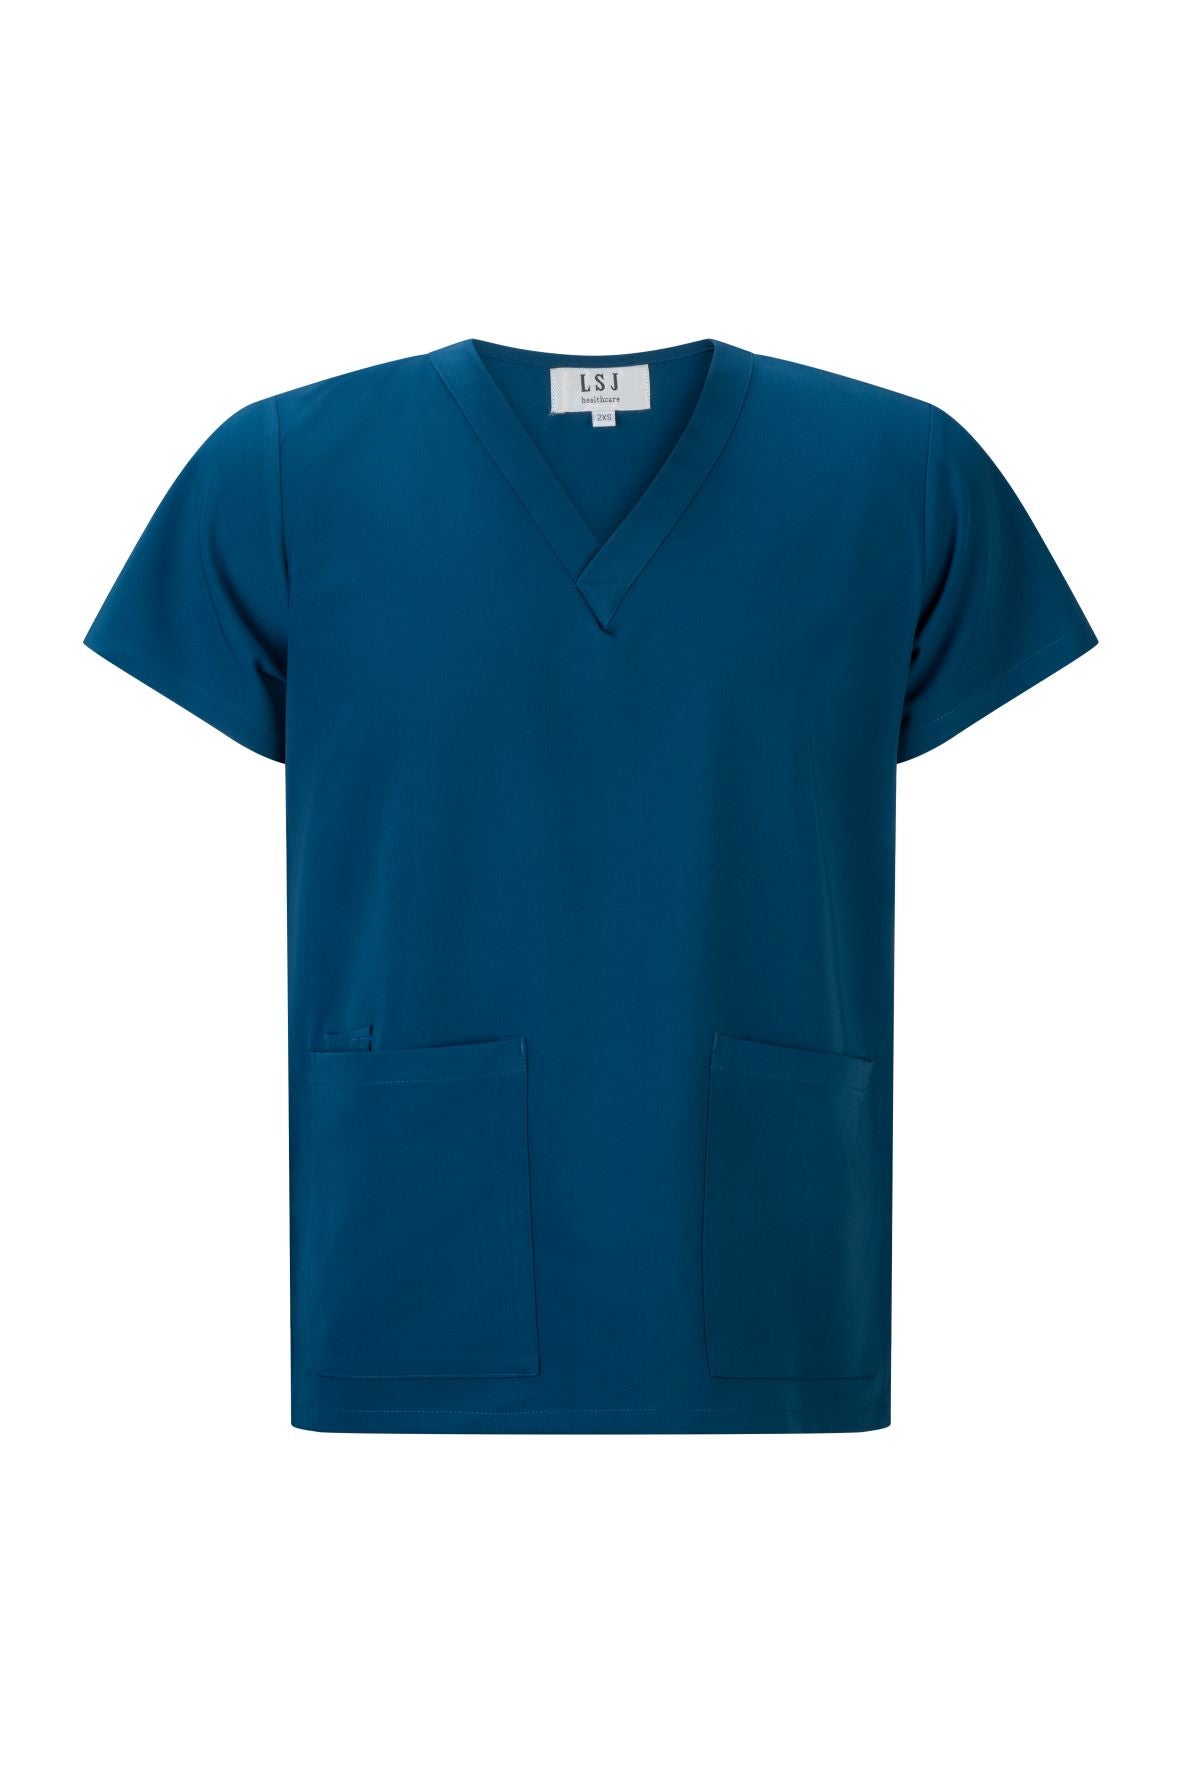 553-PS-PDE PEACOCK Unisex stretch clinical scrub top